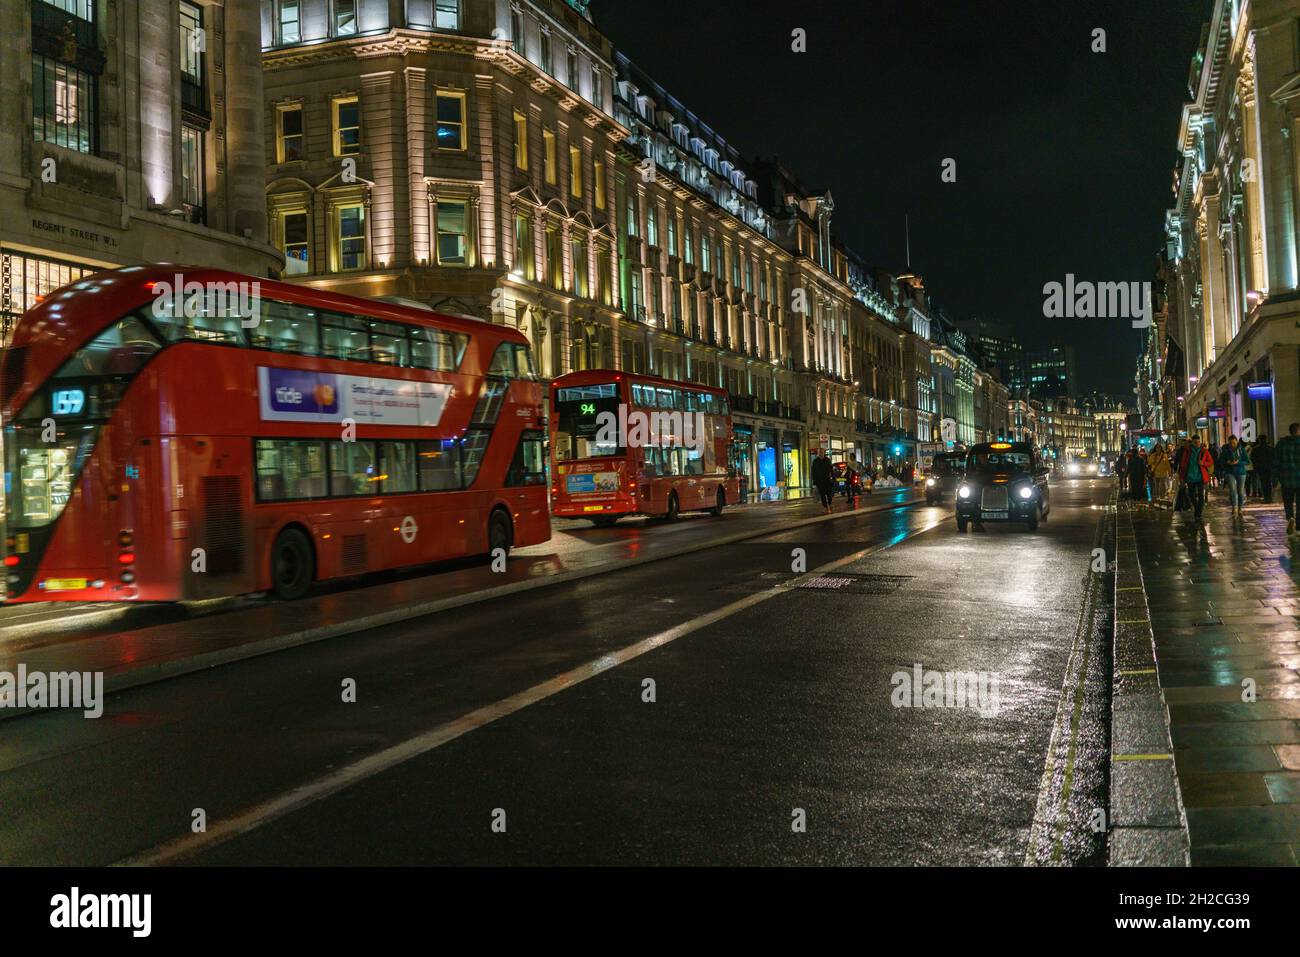 Street photography showing wet London streets at night Stock Photo - Alamy